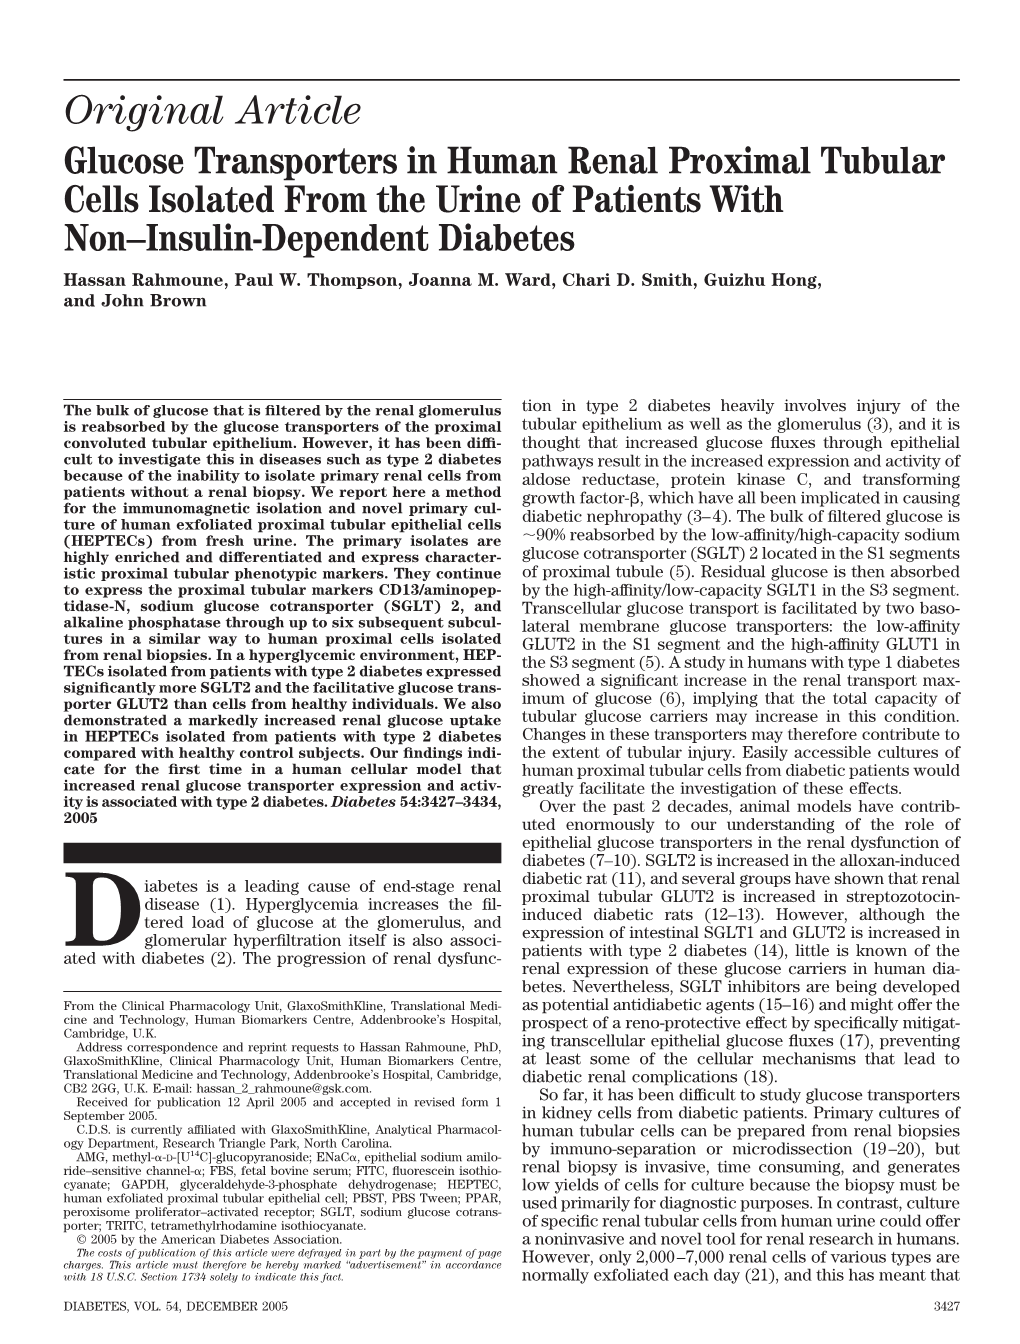 Glucose Transporters in Human Renal Proximal Tubular Cells Isolated from the Urine of Patients with Non–Insulin-Dependent Diabetes Hassan Rahmoune, Paul W